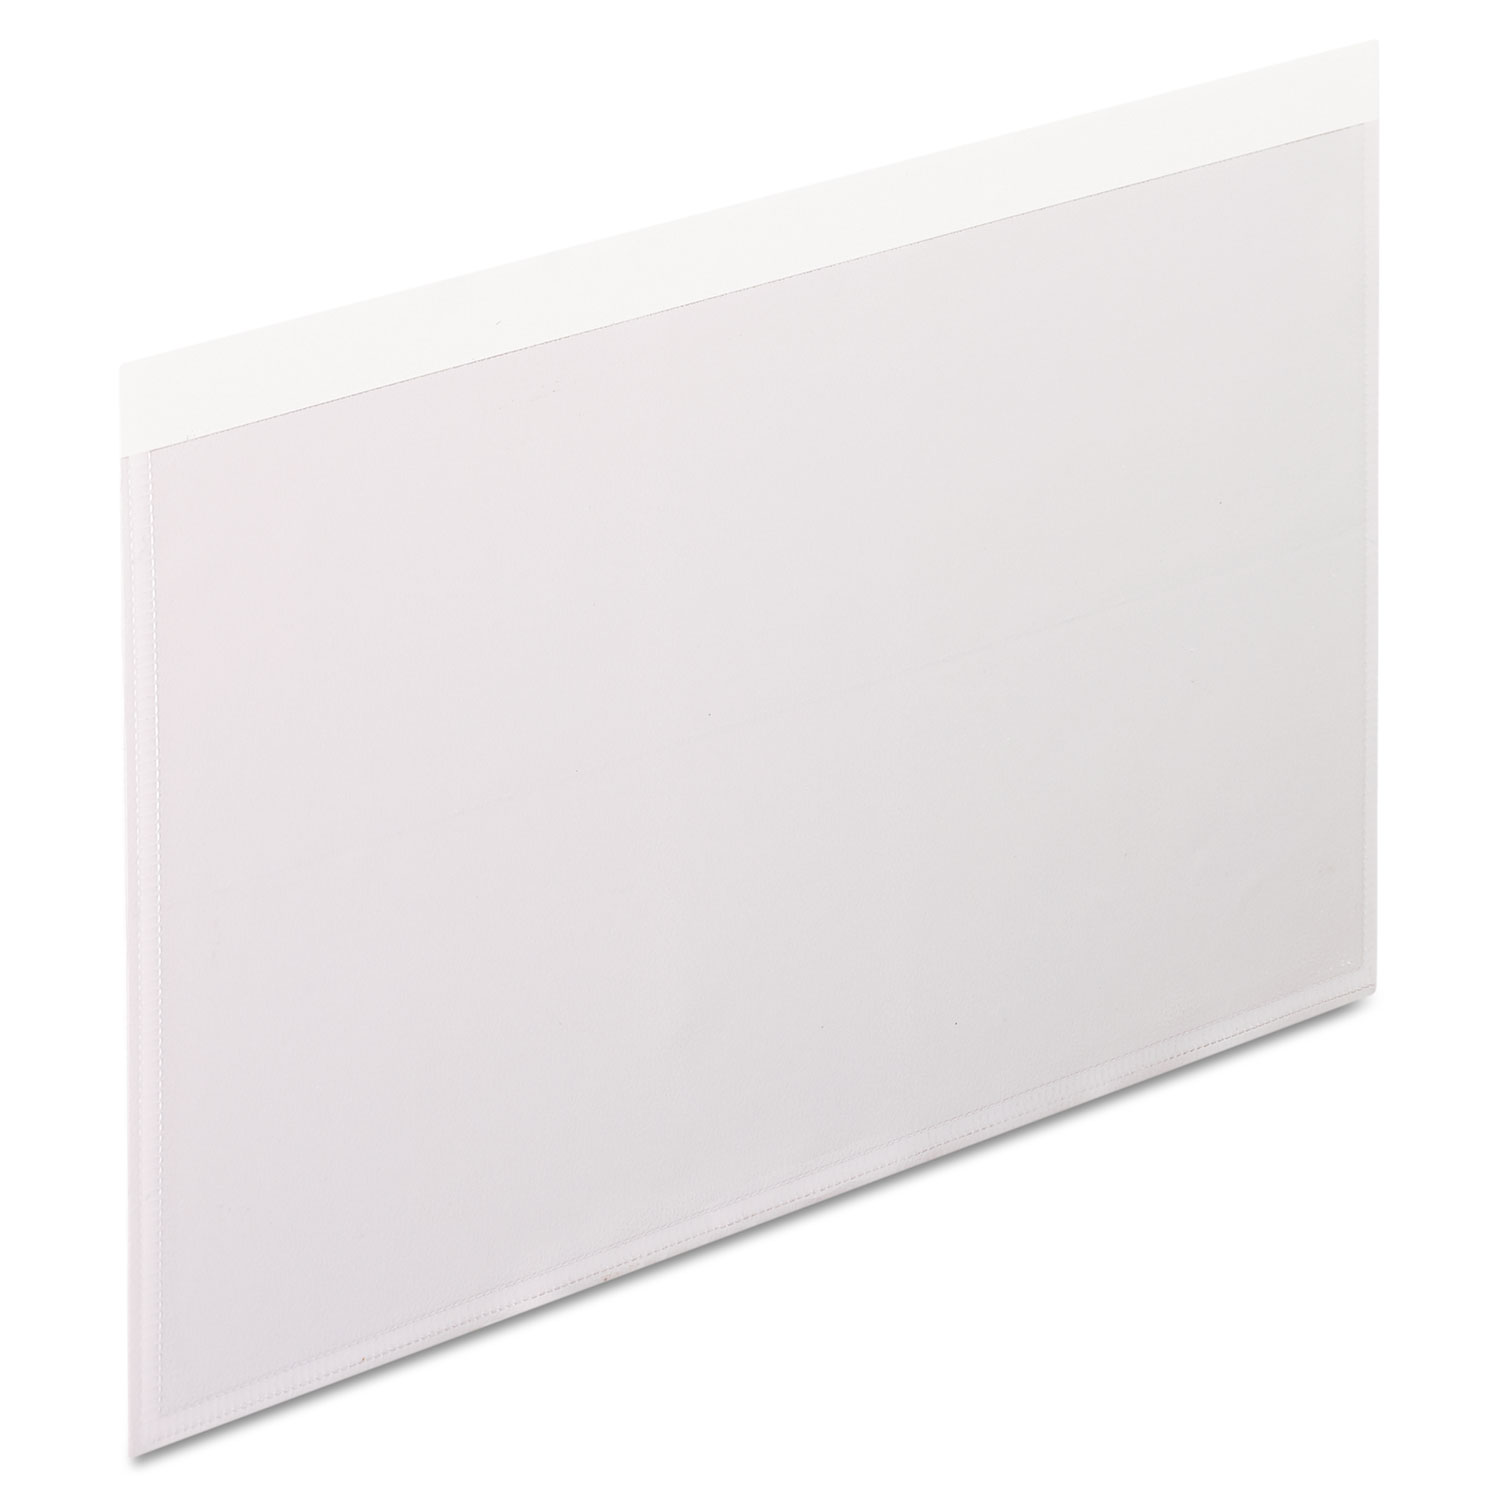  Pendaflex 99377 Self-Adhesive Pockets, 5 x 8, Clear Front/White Backing, 100/Box (PFX99377) 